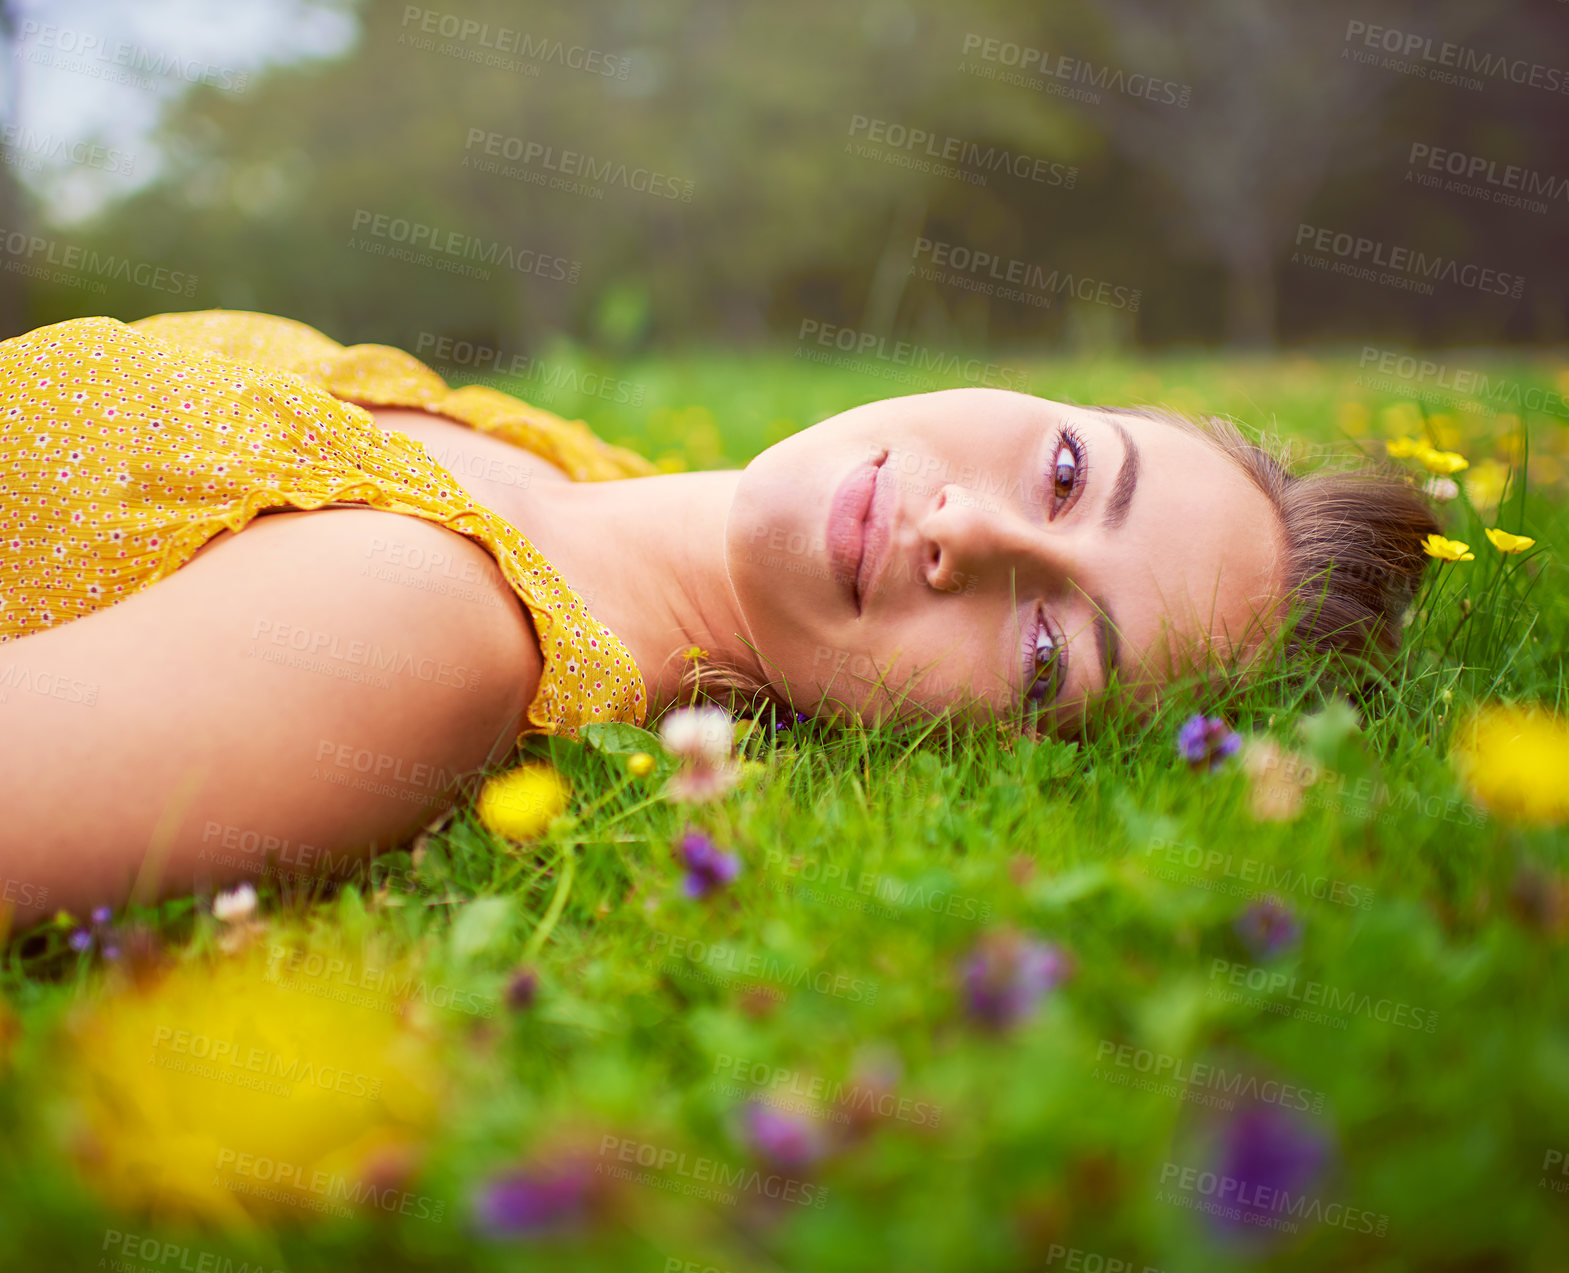 Buy stock photo Portrait of a young woman lying down in a field of grass and flowers